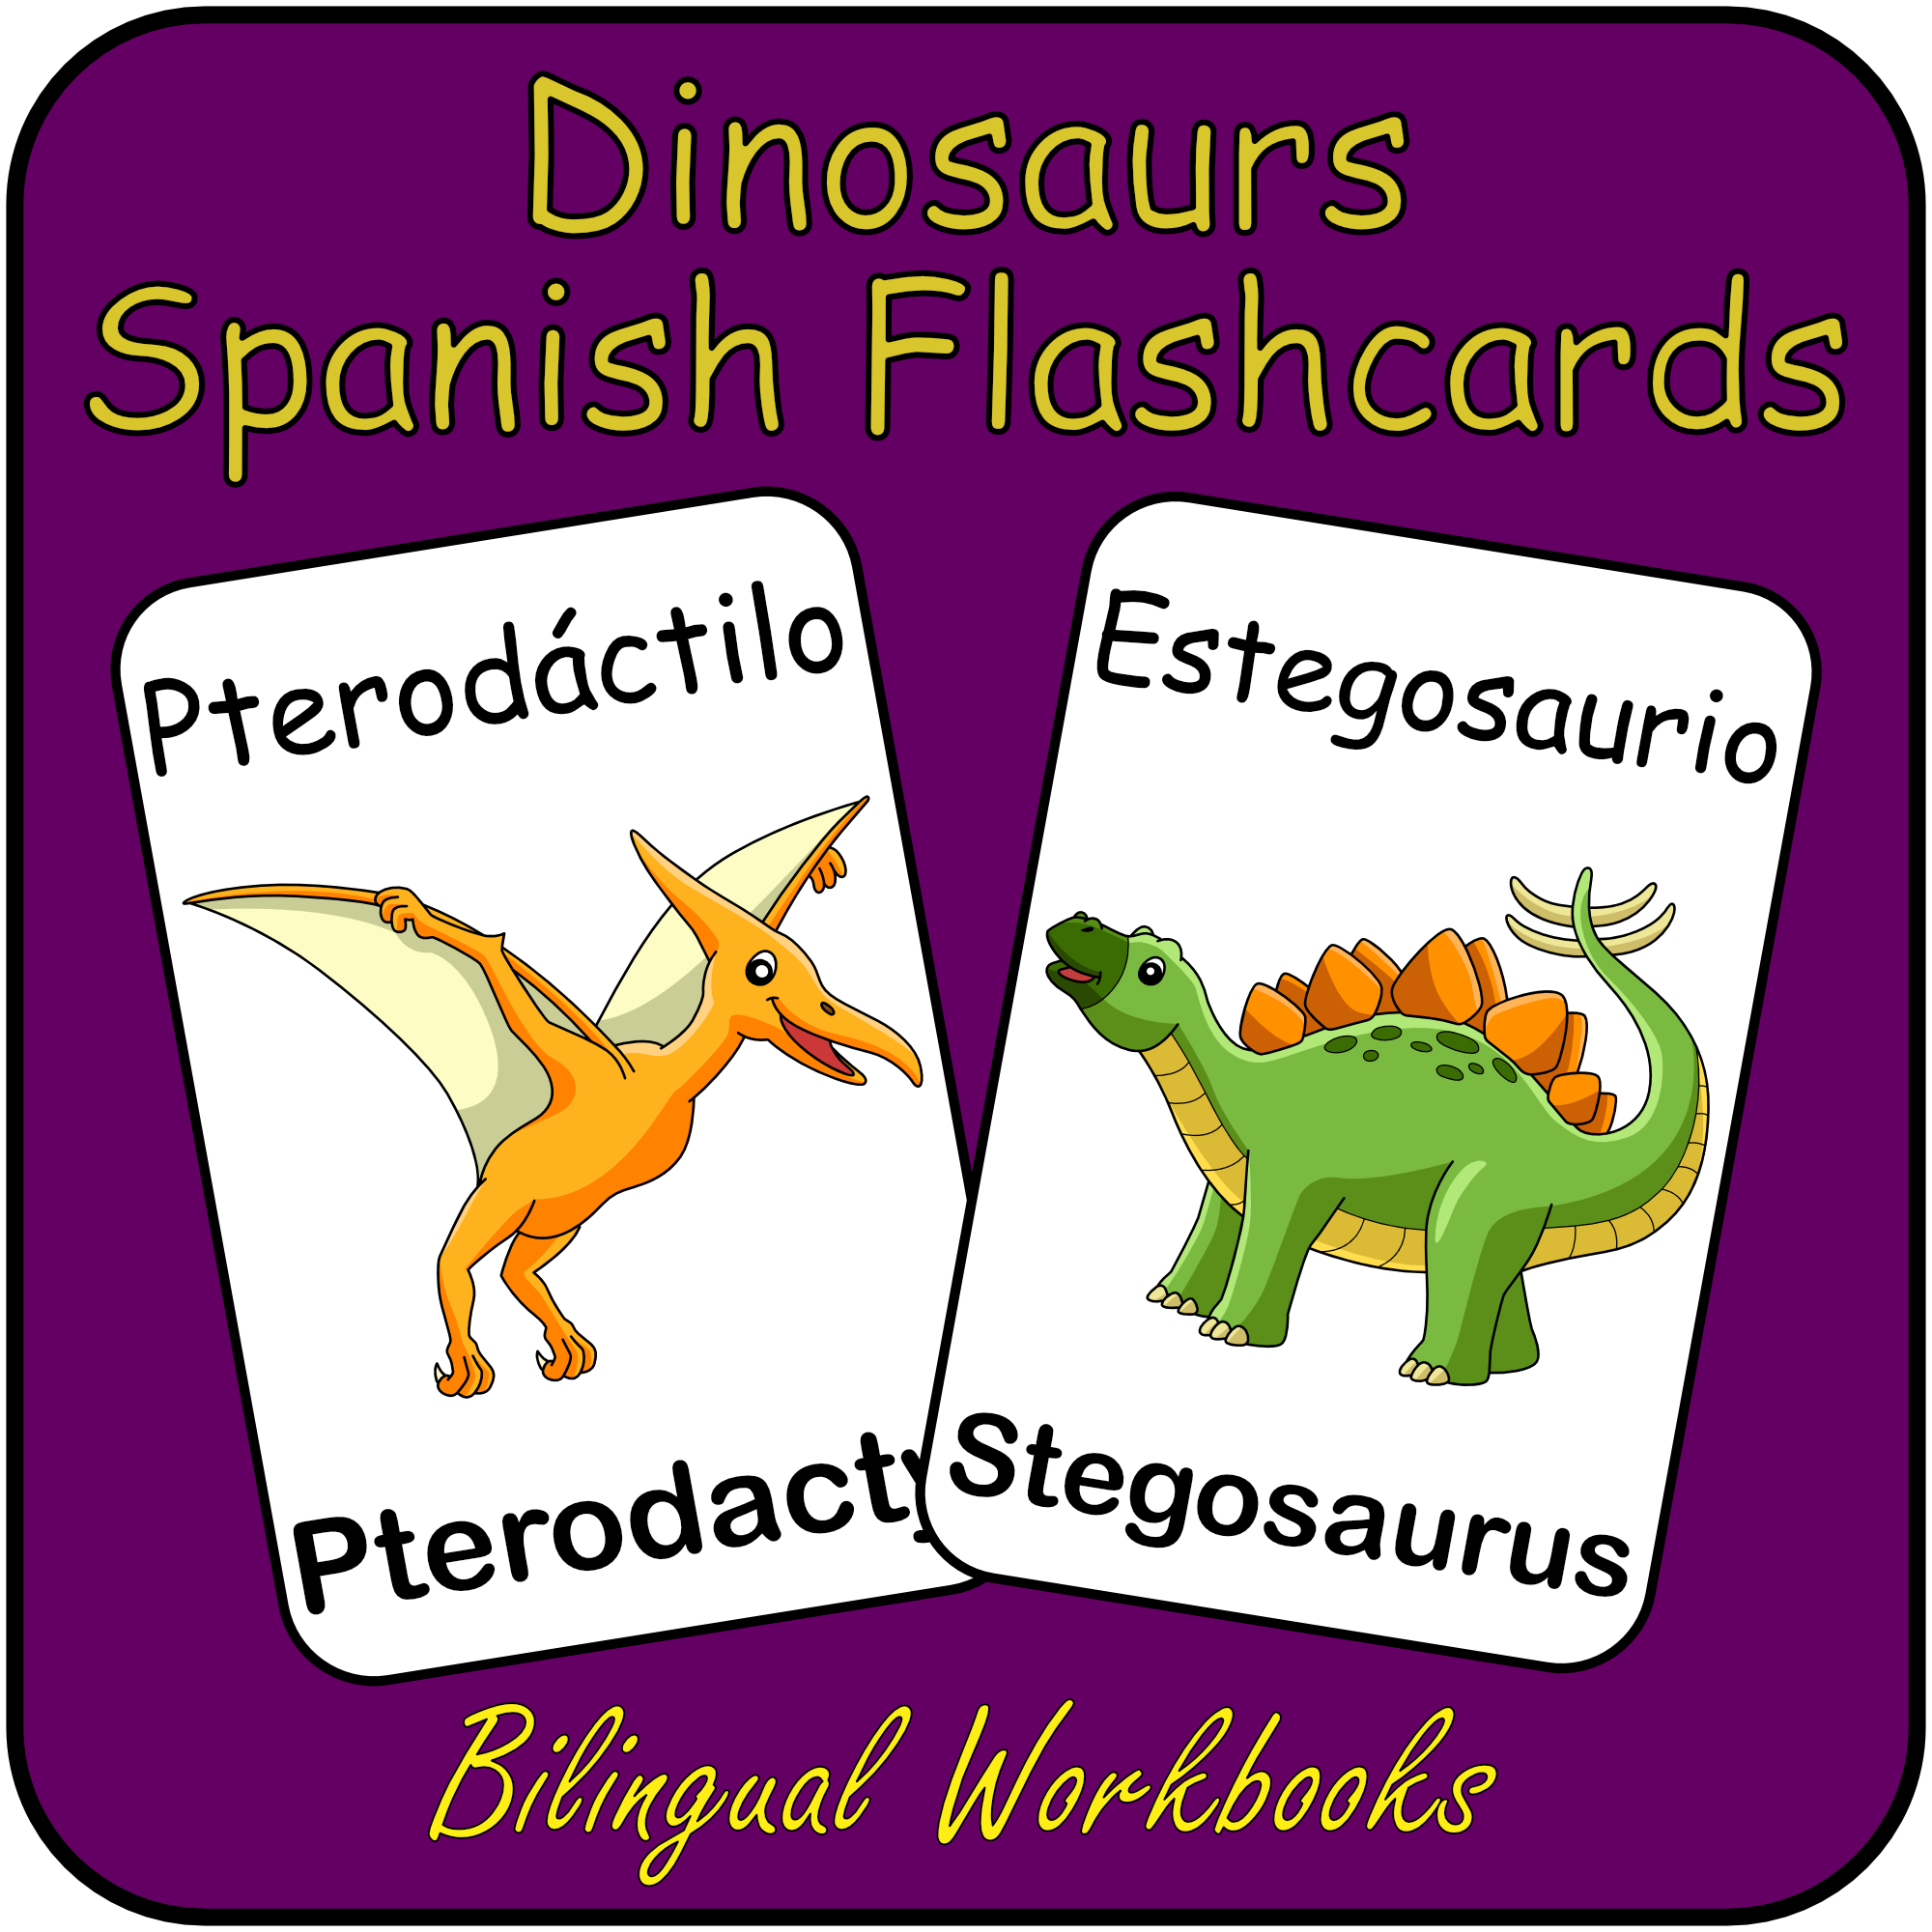 DINOSAURS - Spanish Flash Cards - Vocabulary Study flashcards with English and Spanish - Learn or Teach Spanish